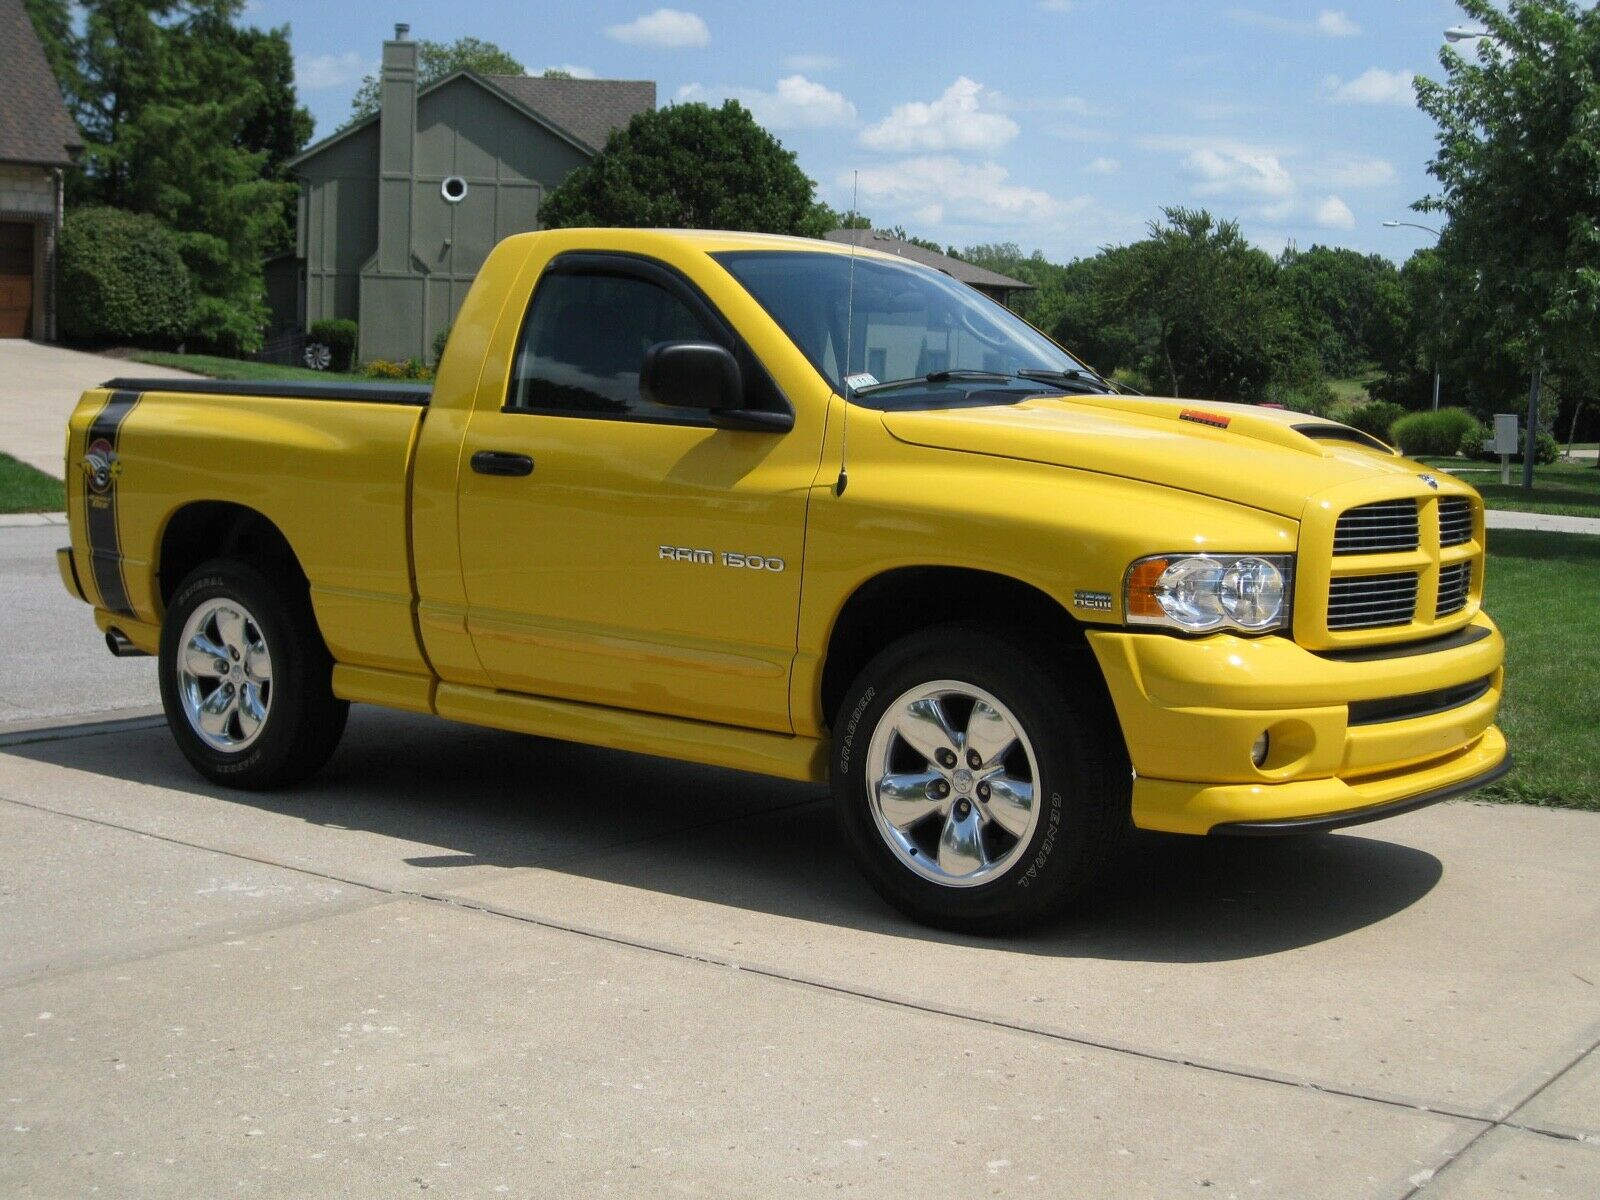 2005 Dodge Ram 1500 Slt Rumble Bee 2005 Dodge Ram 1500 Rumble Bee 45k Original Miles Immaculate Inside And Out